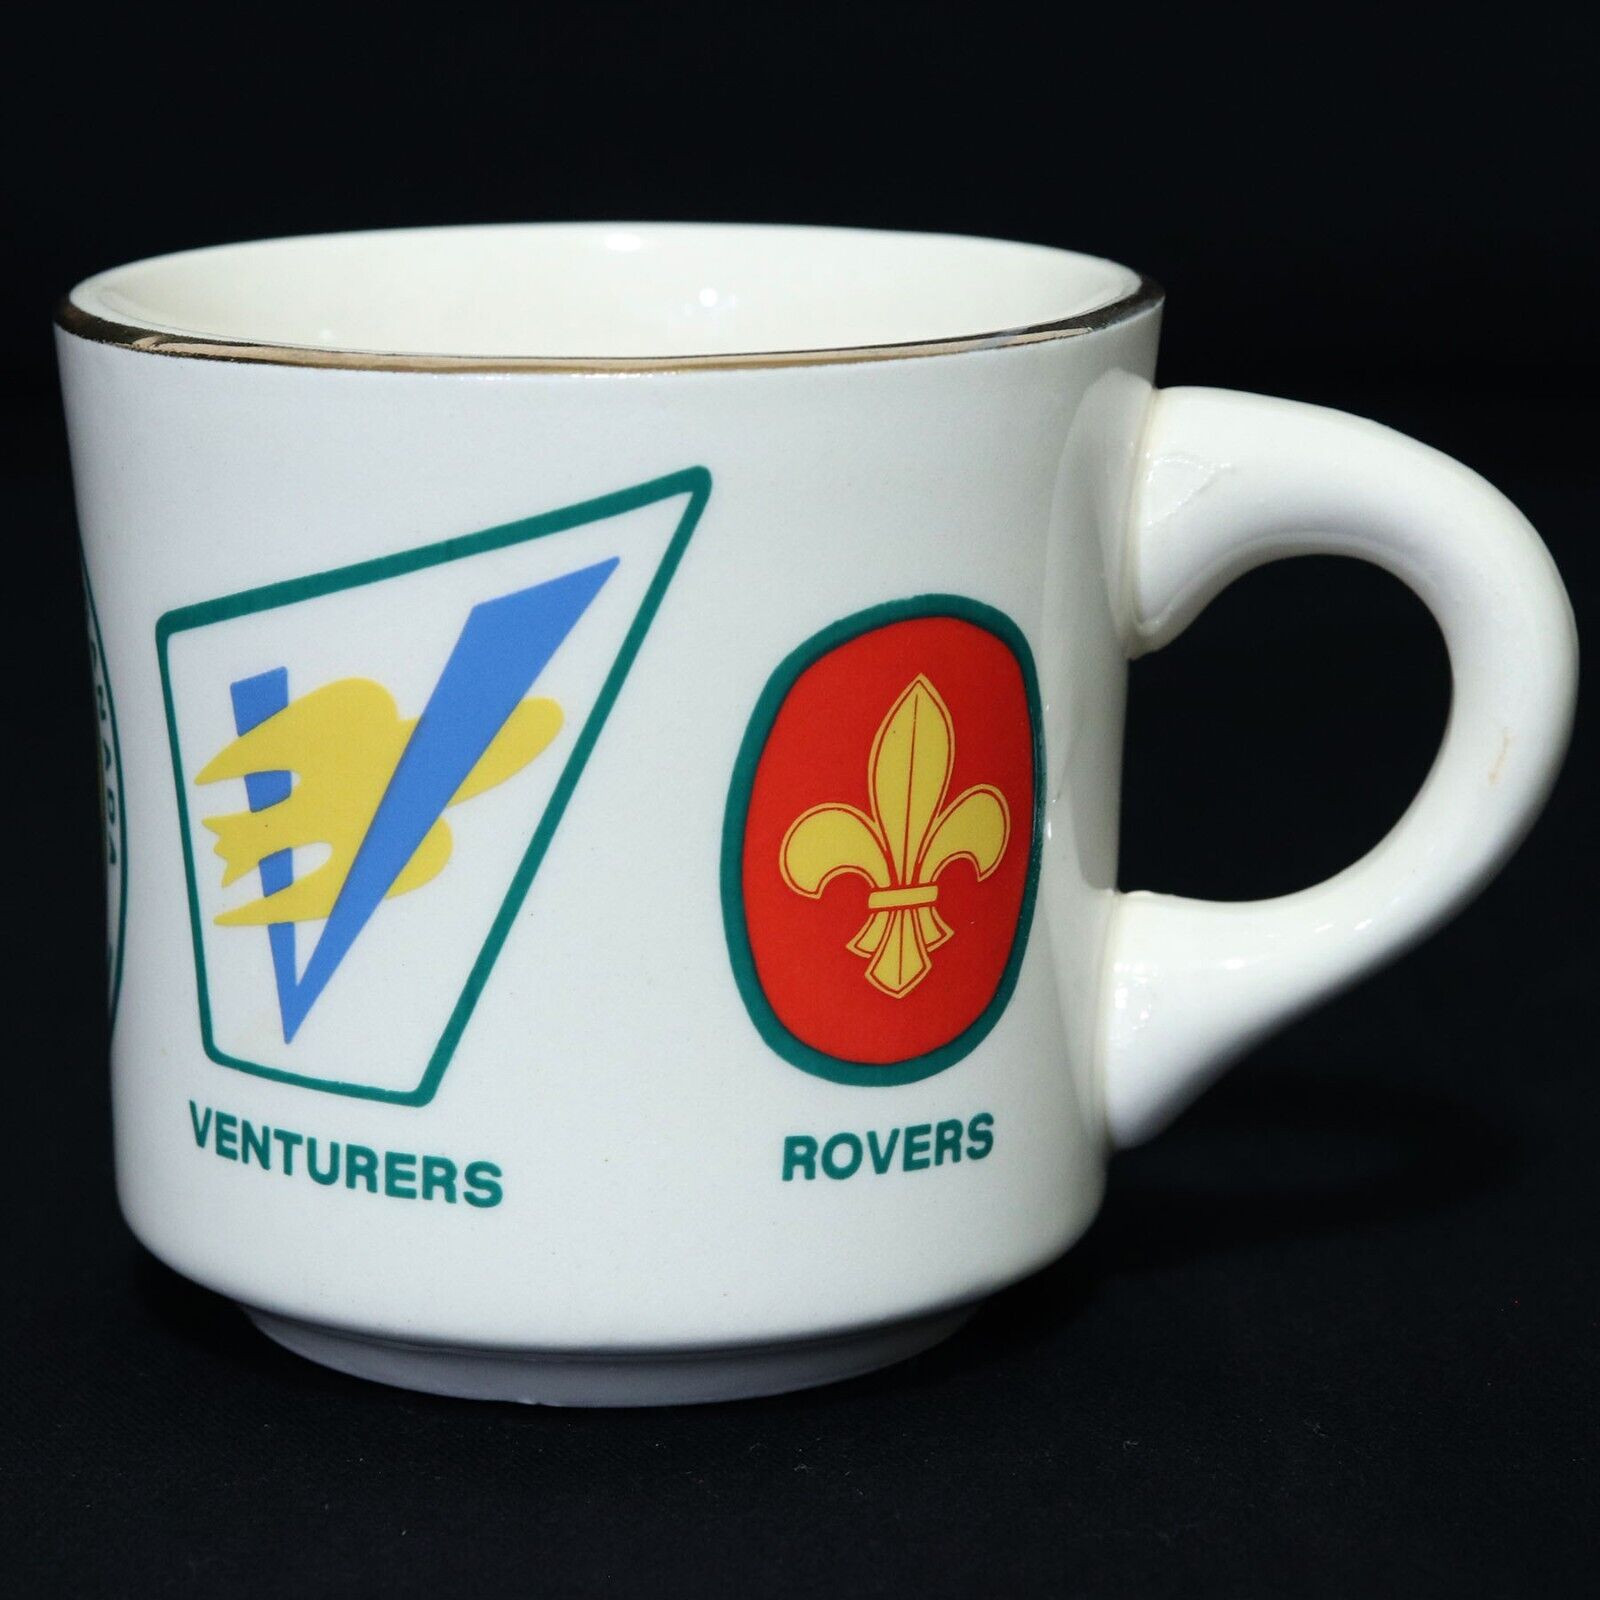 Boy Scouts of Canada VTG BSA BSC Ceramic Mug Wolf Cubs, Venturers, Rovers, Cup